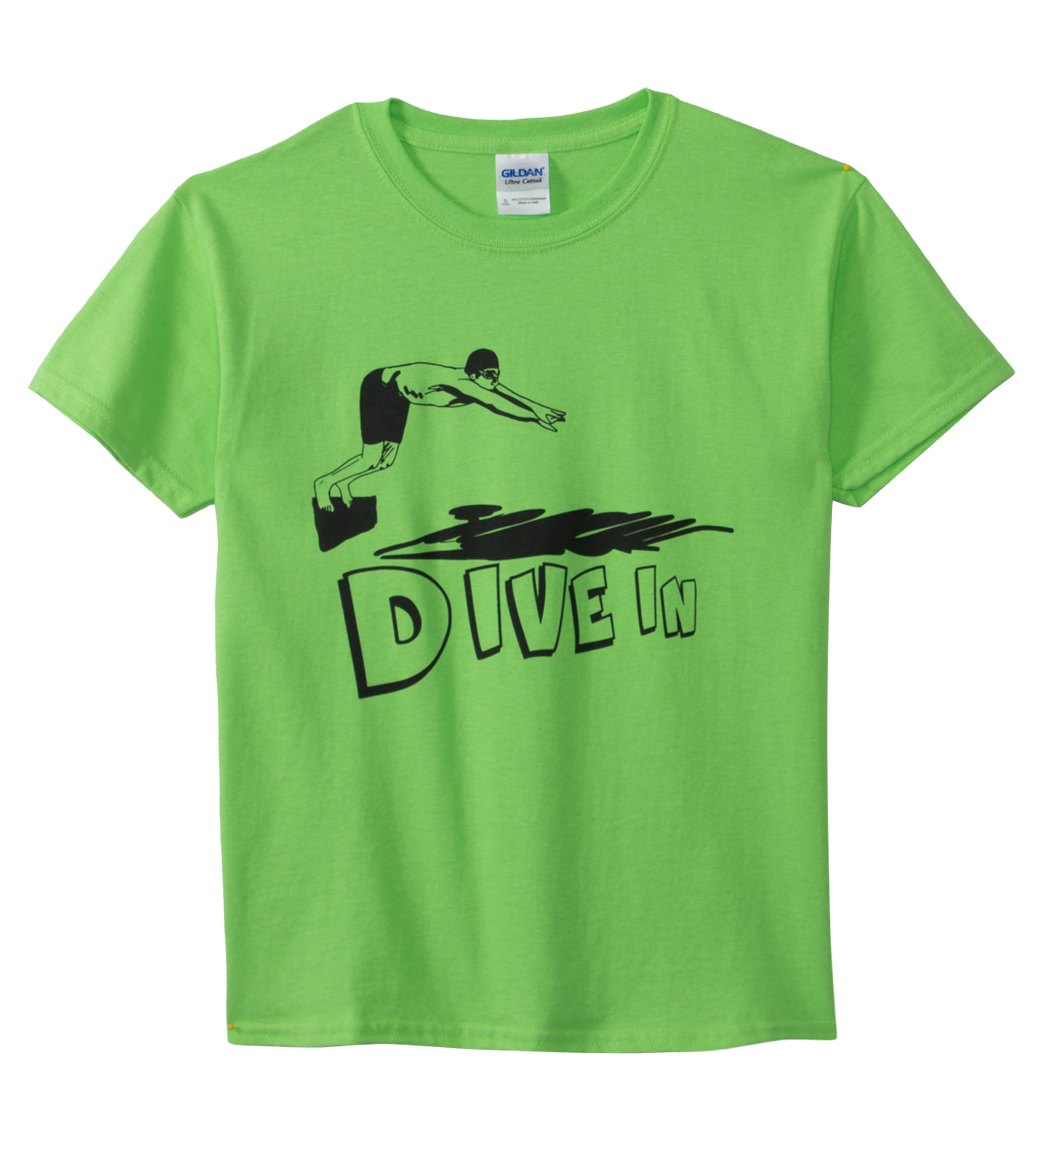 Ambro Manufacturing Dive In Girls' Tee Shirt - Green Youth Large Cotton - Swimoutlet.com